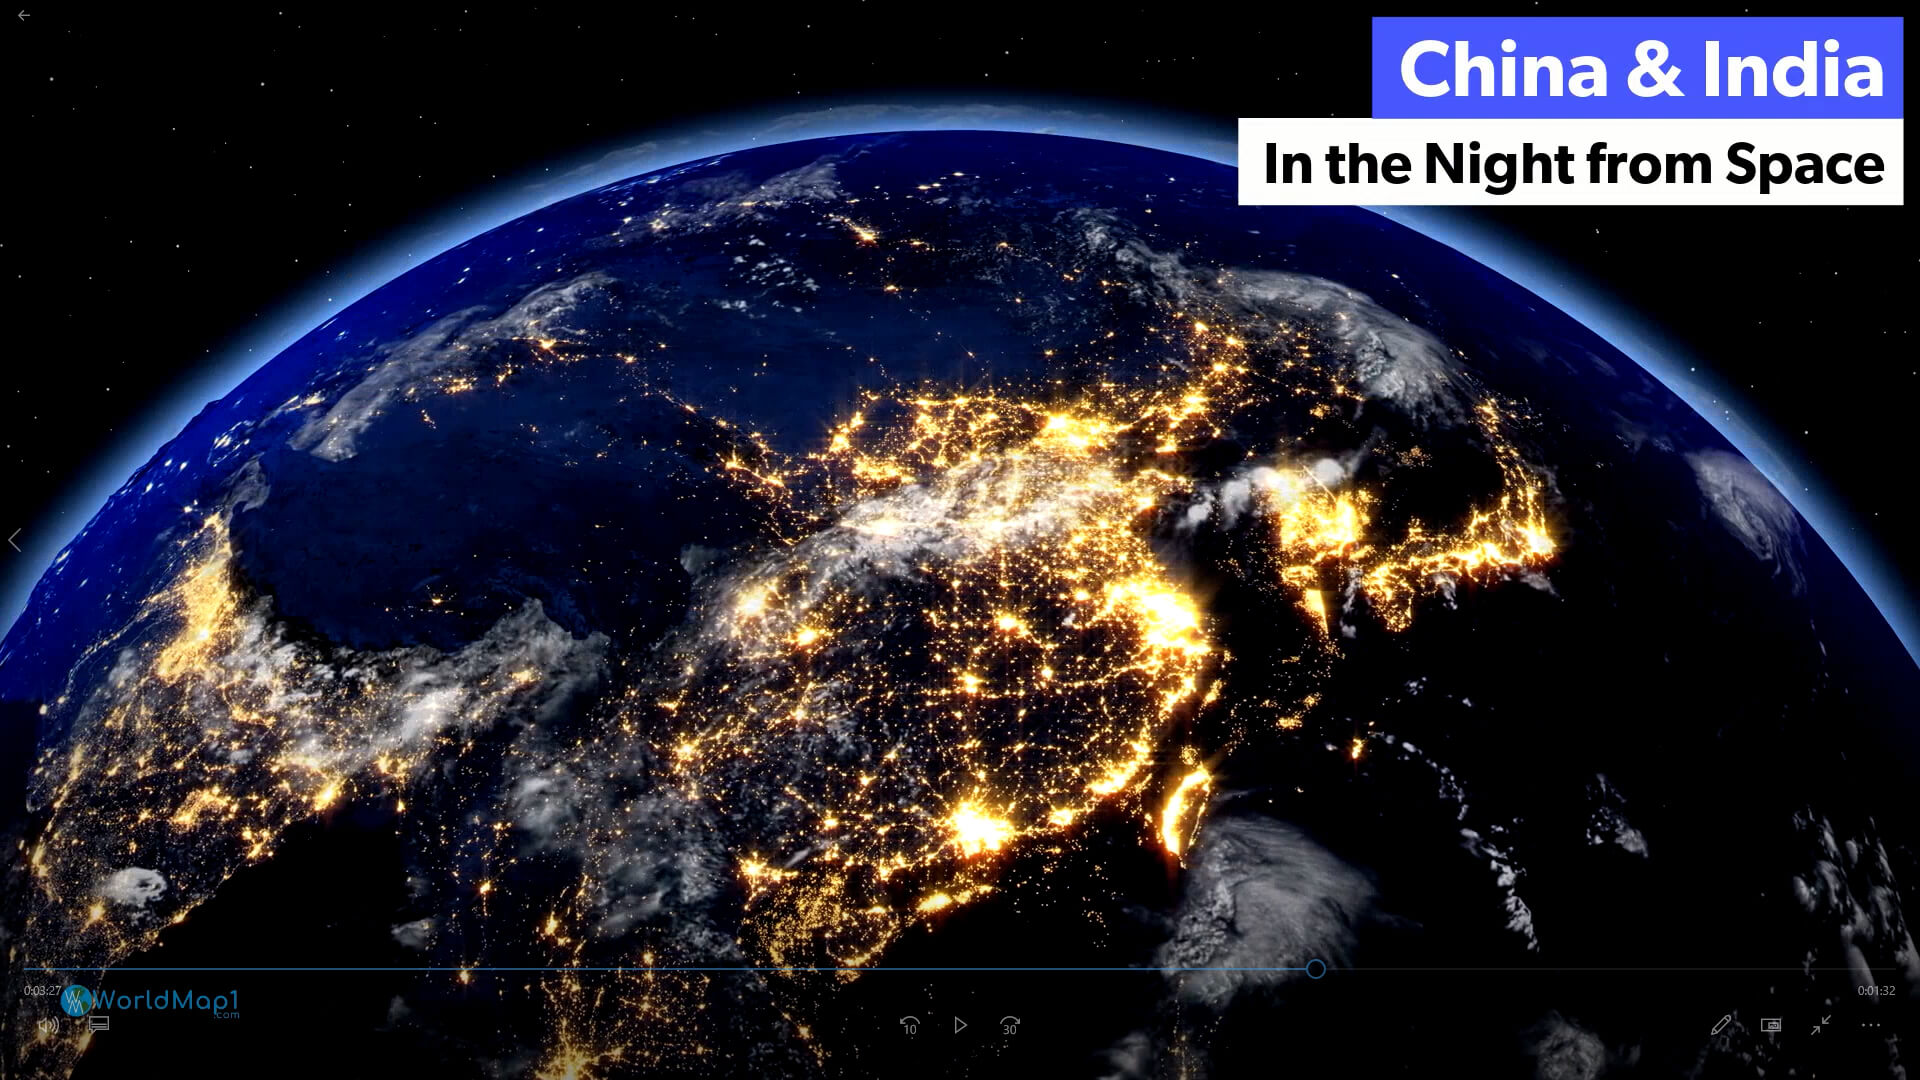 China and India in the Night from Space